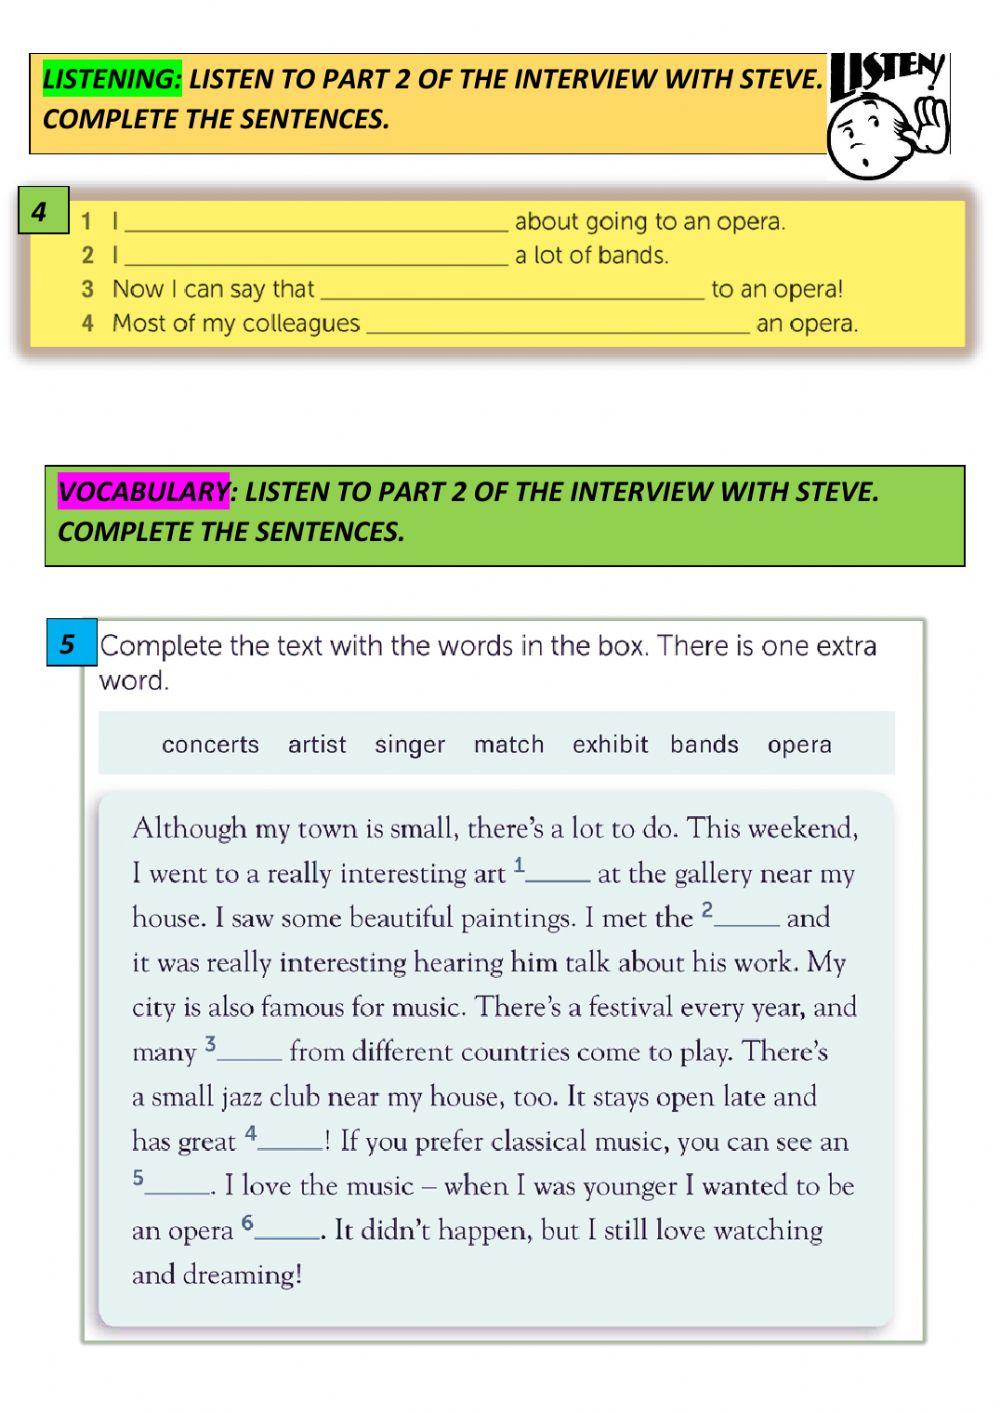 PRESENT PERFECT SIMPLE AND VOCABULARY